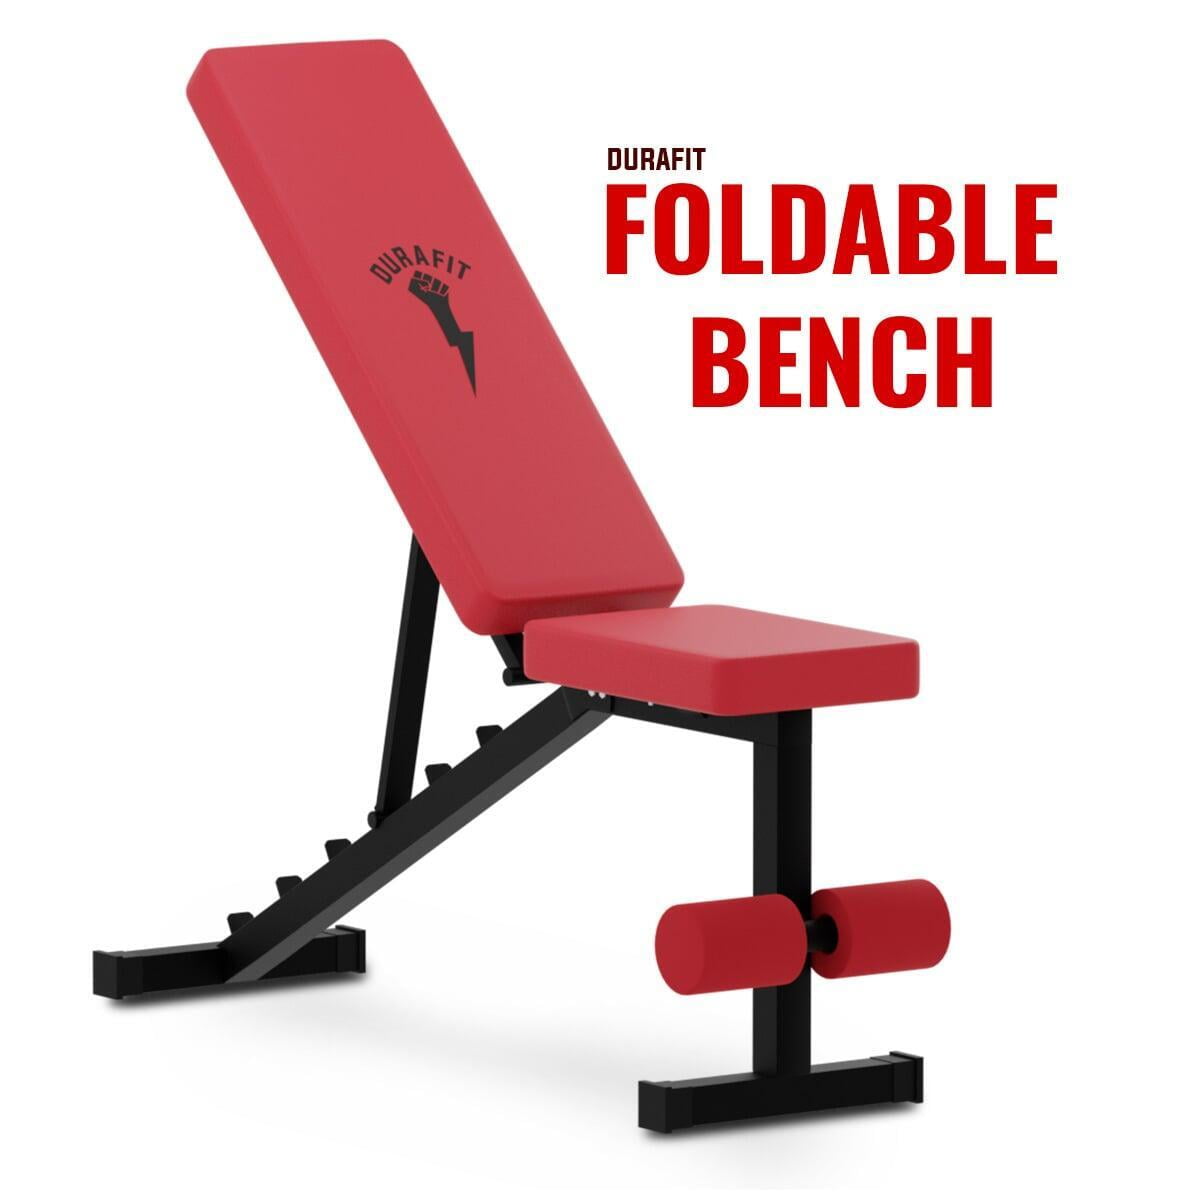 Durafit Foldable Bench FB01 with Product Multiple Benefits